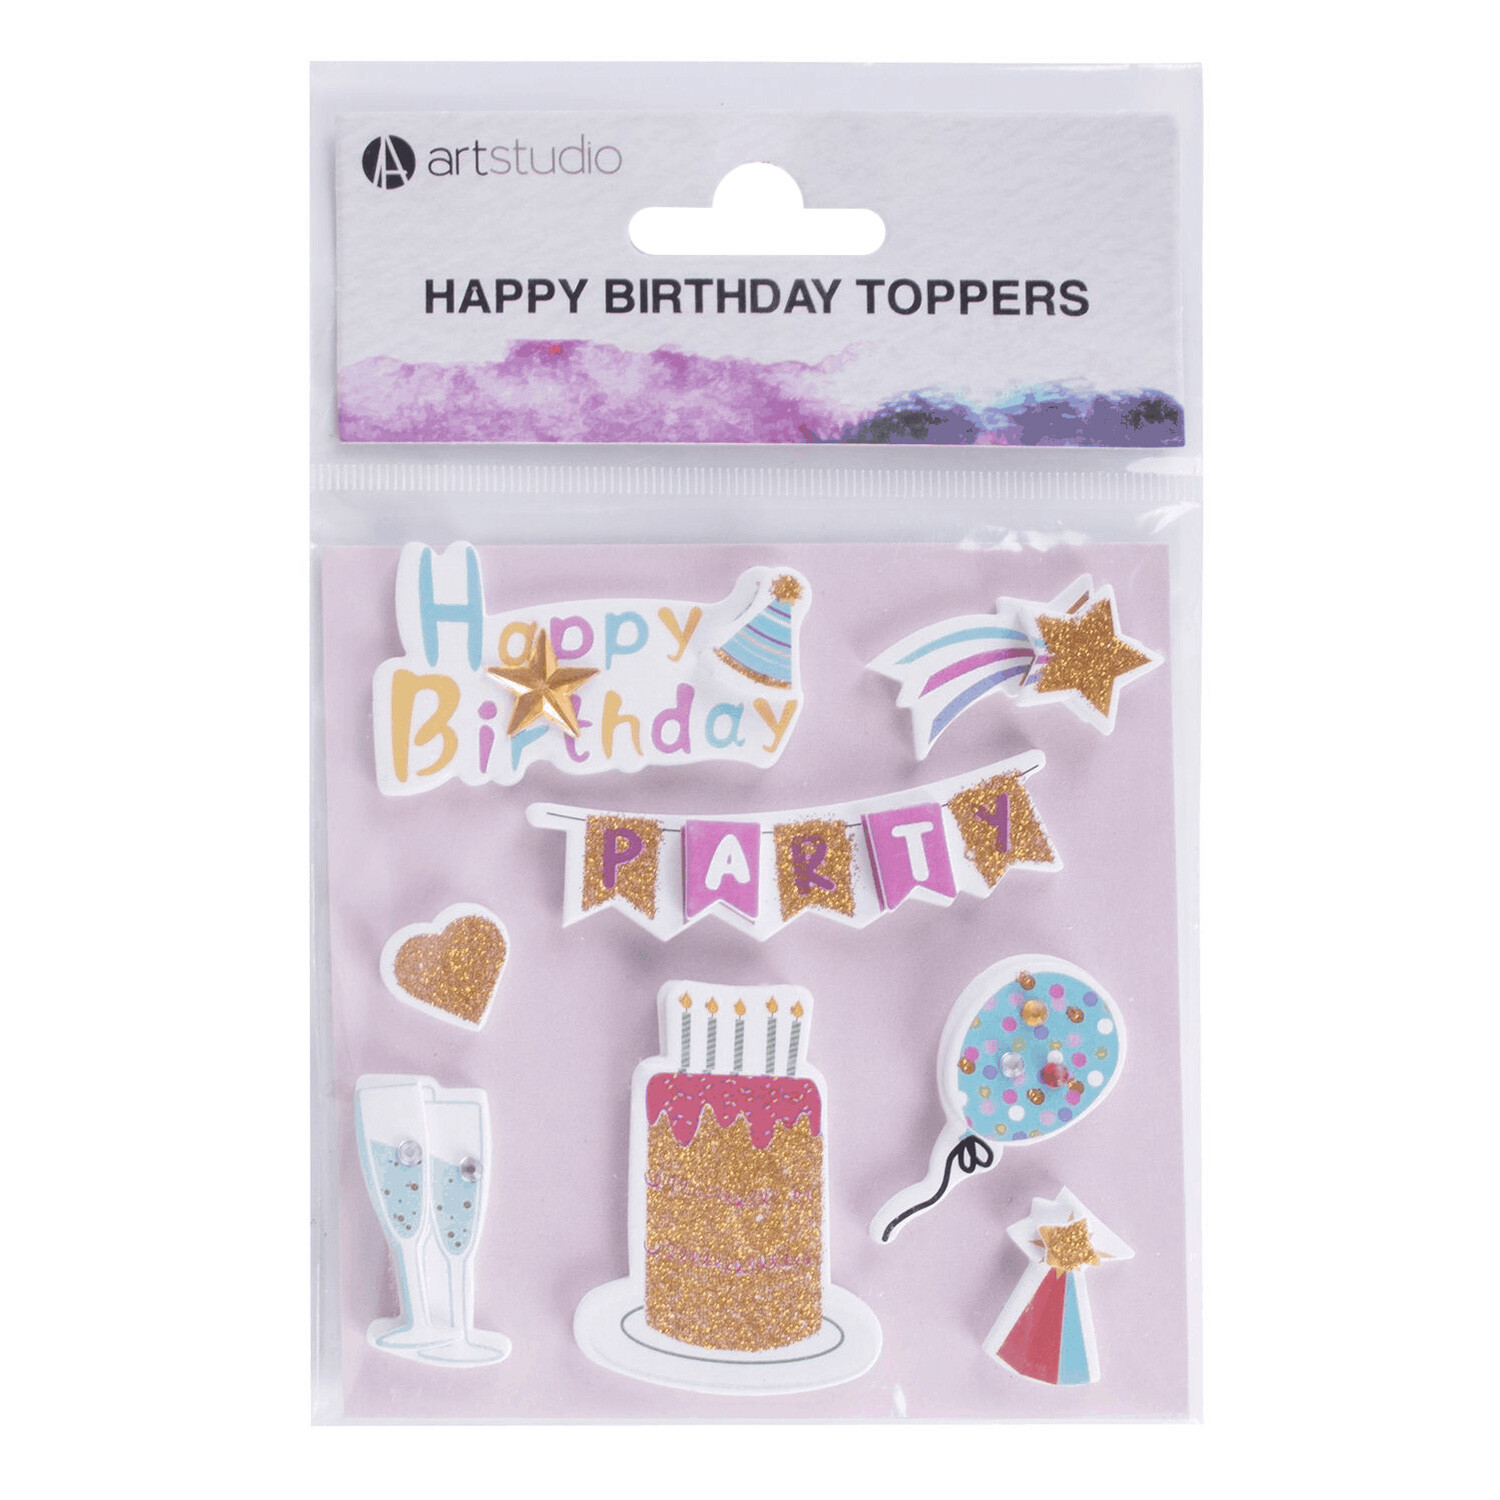 Happy Birthday Toppers Image